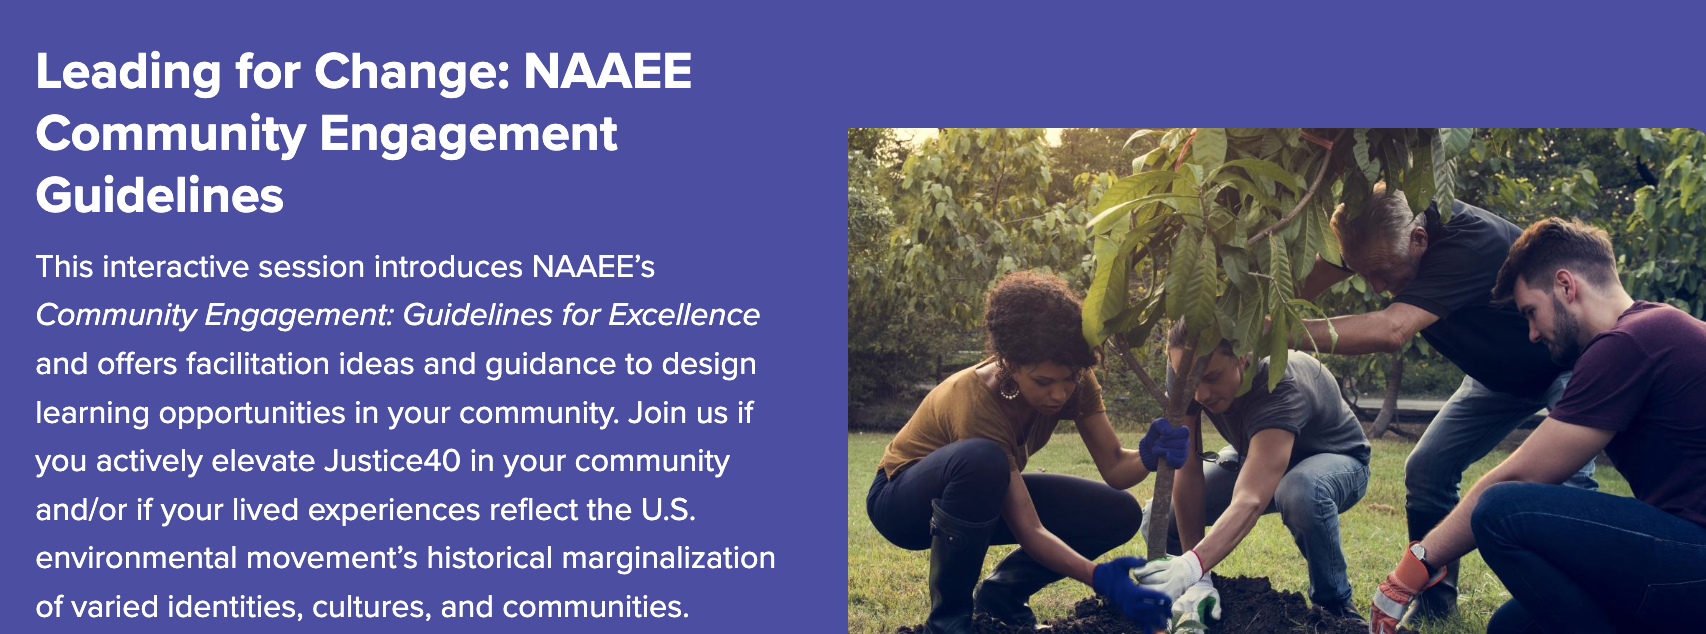 Image of workshop title and summary text from NAAEE conference website